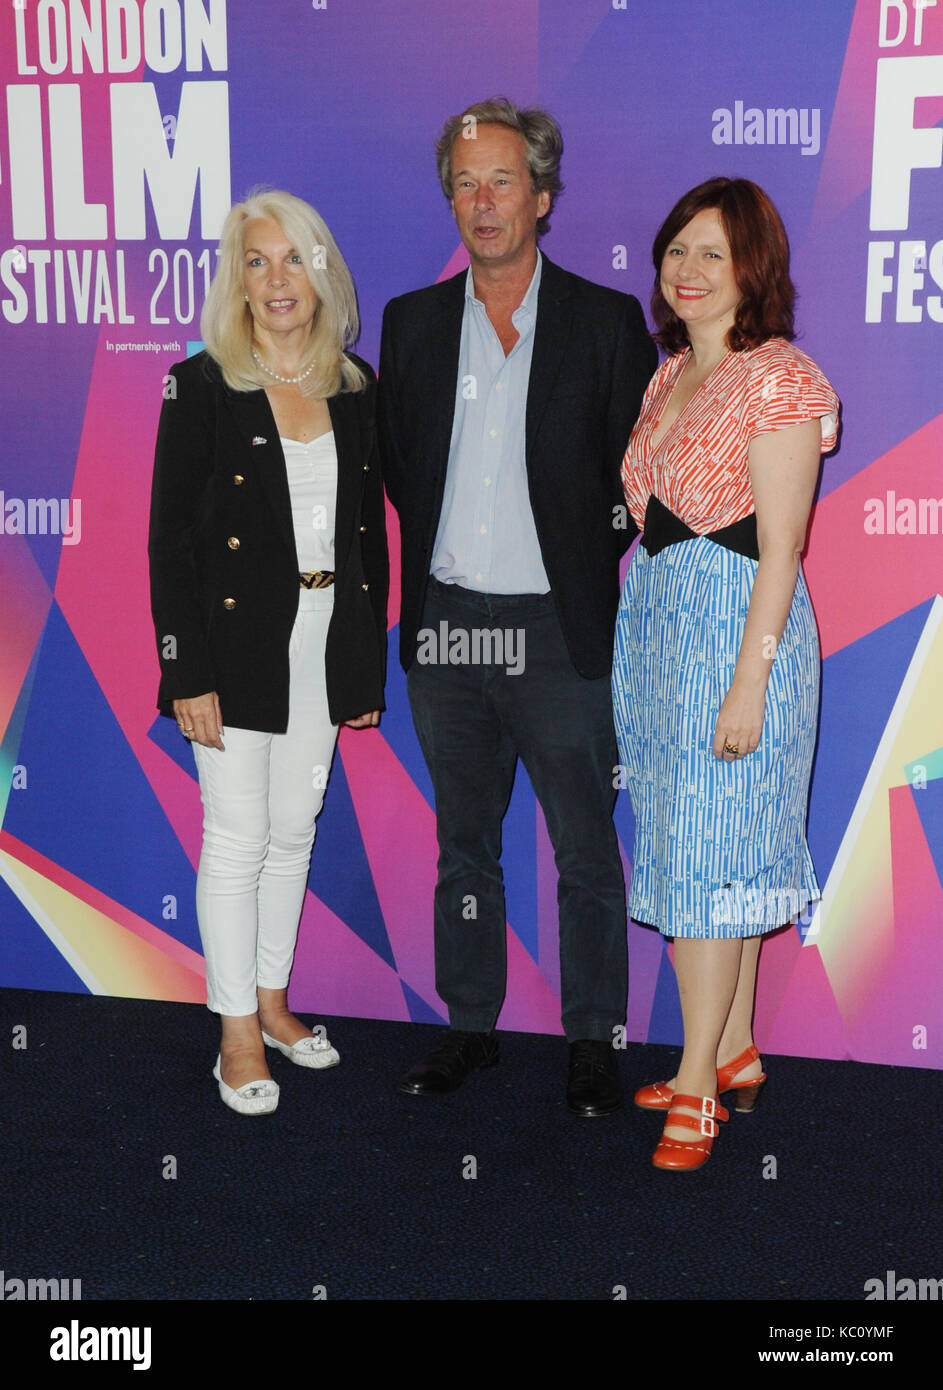 61st BFI London Film Festival 2017 Launch Photocall at Odeon Leicester Square  Featuring: Clare Stewart, Jonathan Cavendish, Amanda Nevell Where: London, United Kingdom When: 31 Aug 2017 Credit: WENN.com Stock Photo